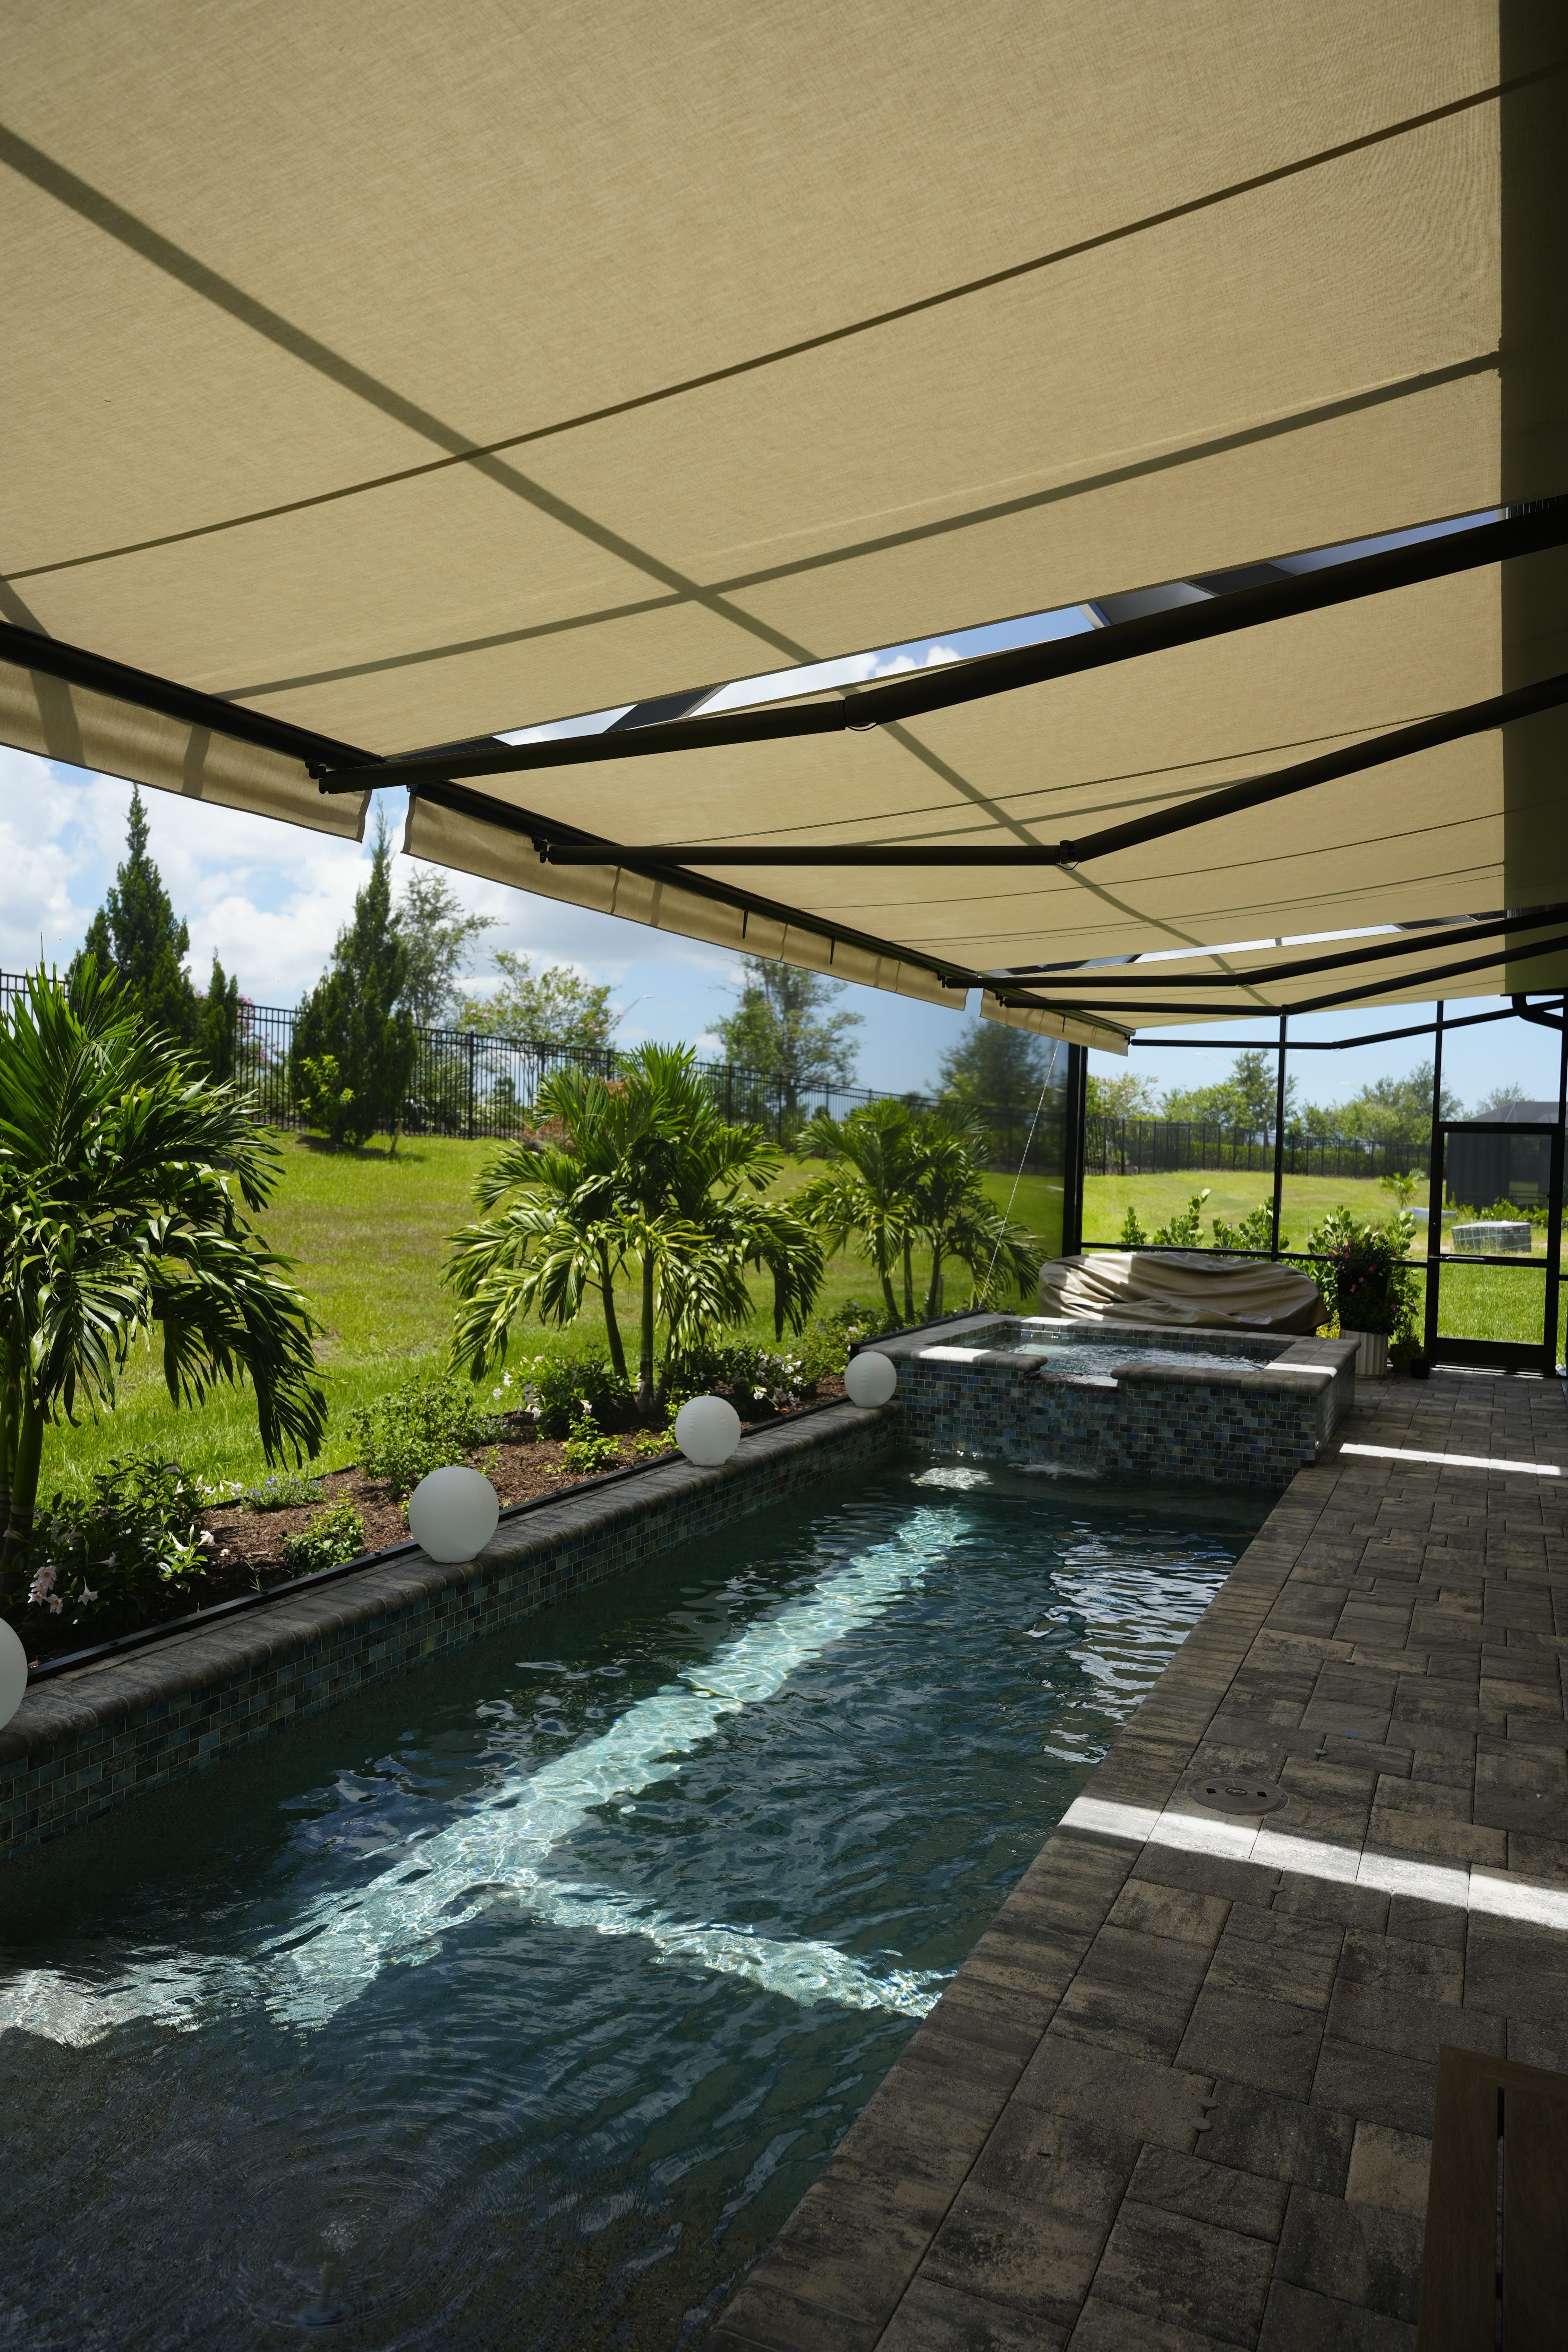 Awnings,Retractable Awnings